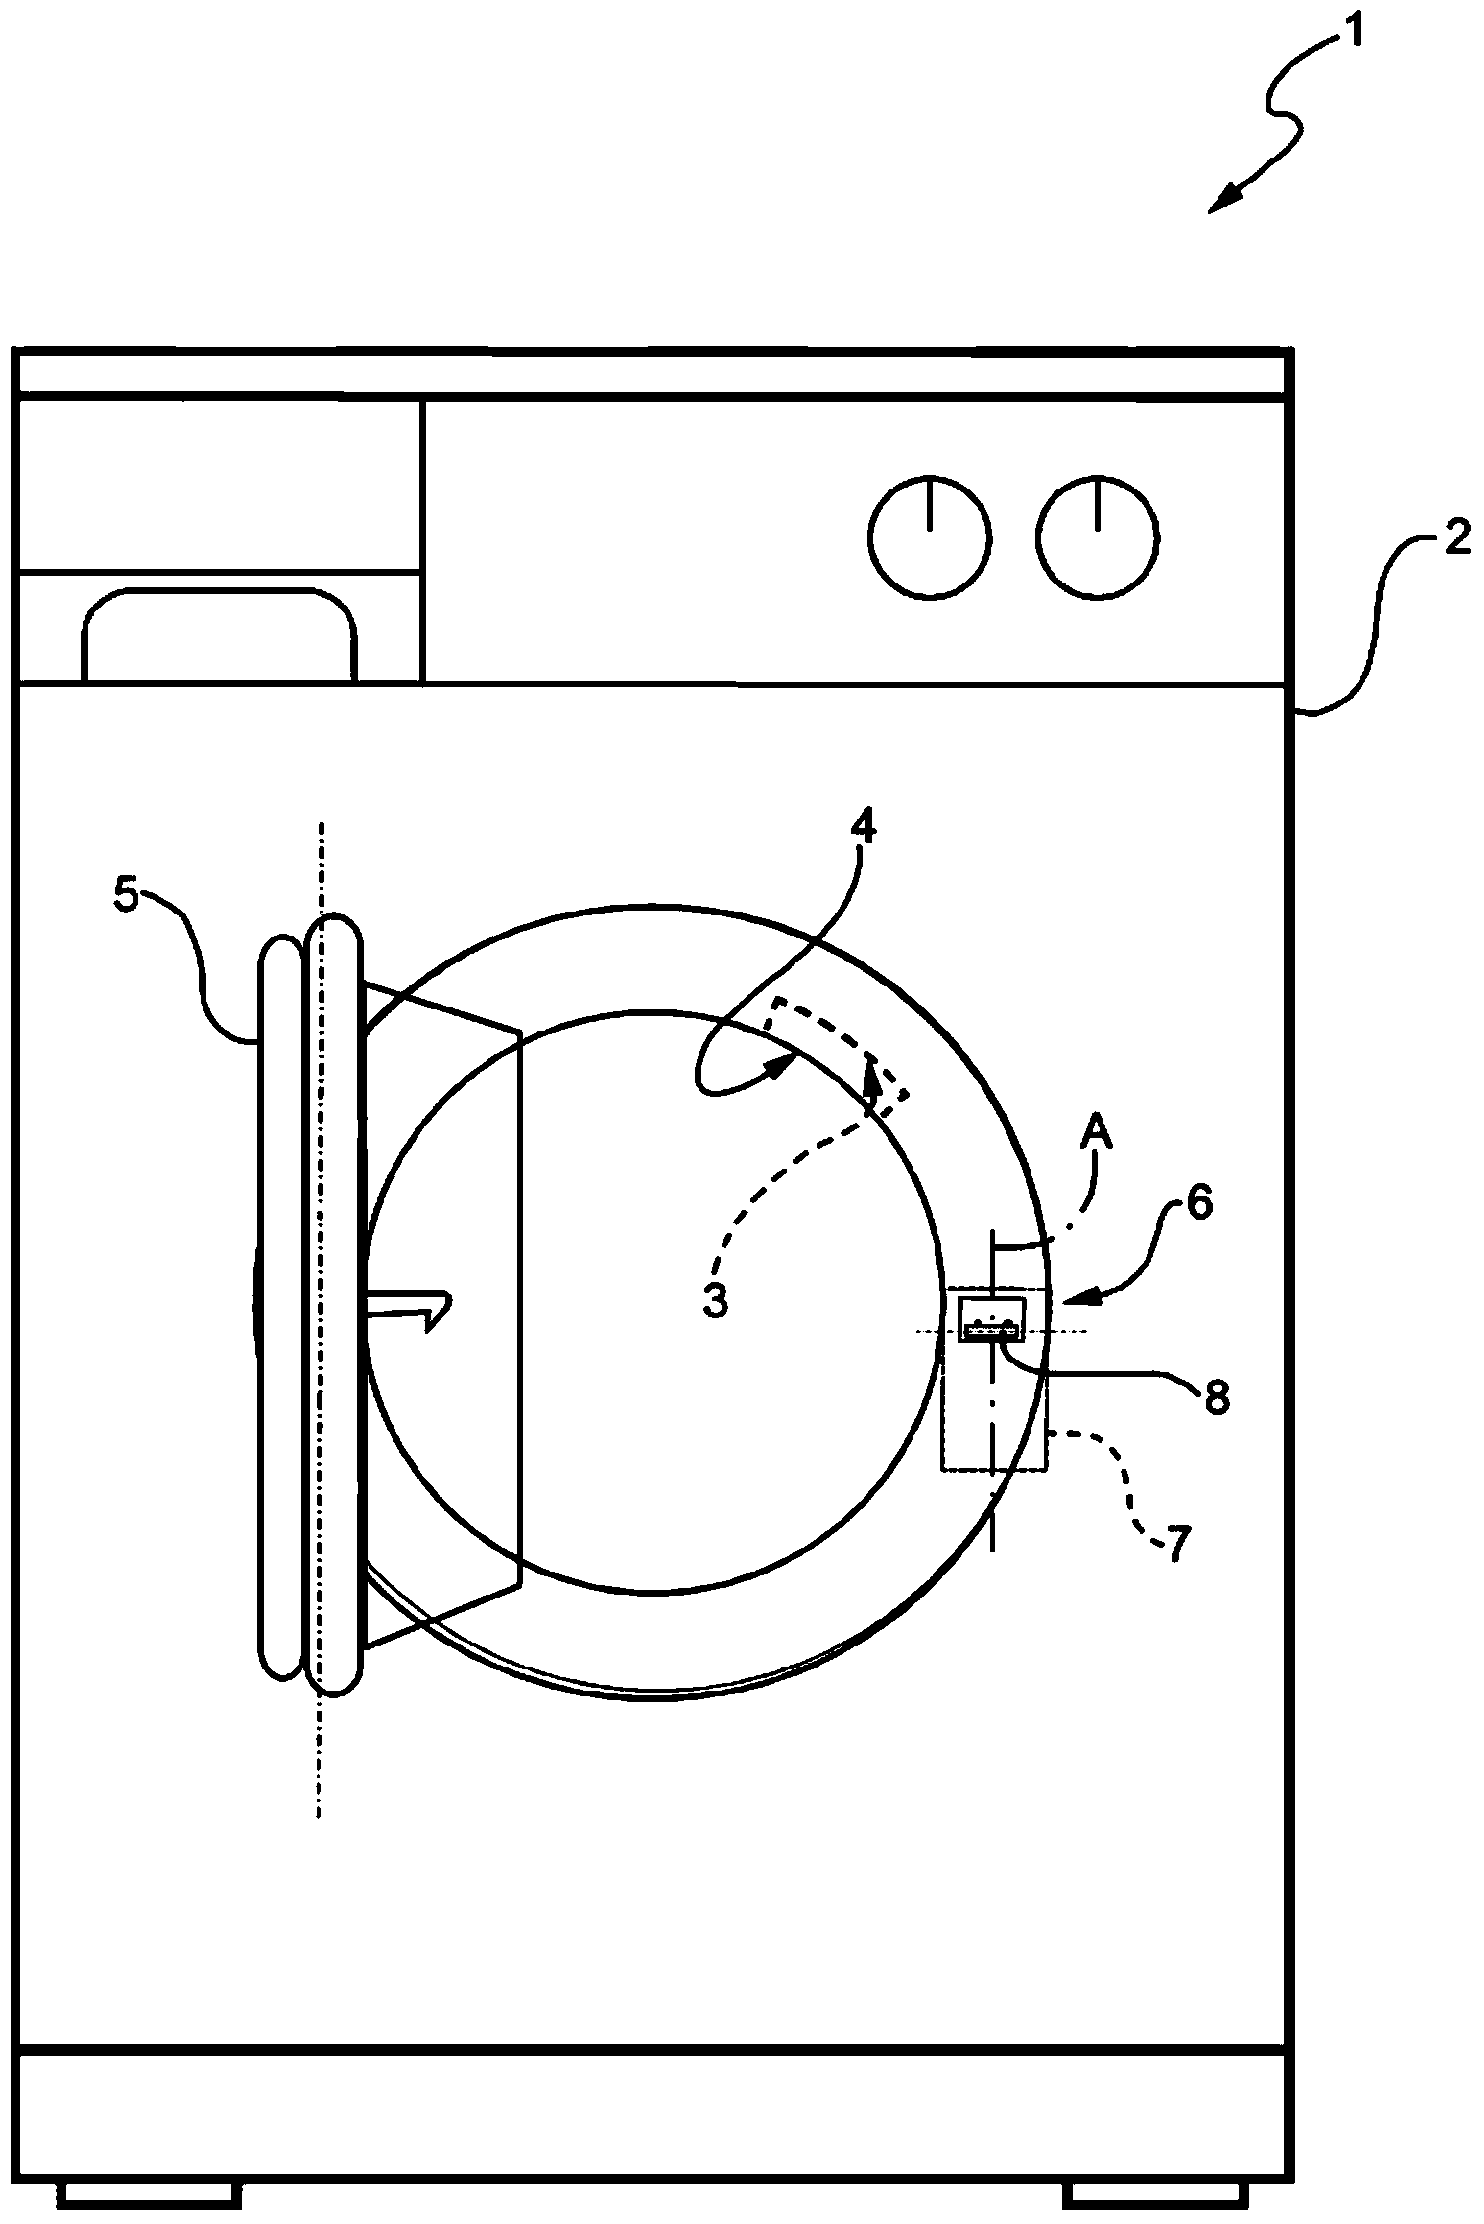 Electric household appliance door locking device